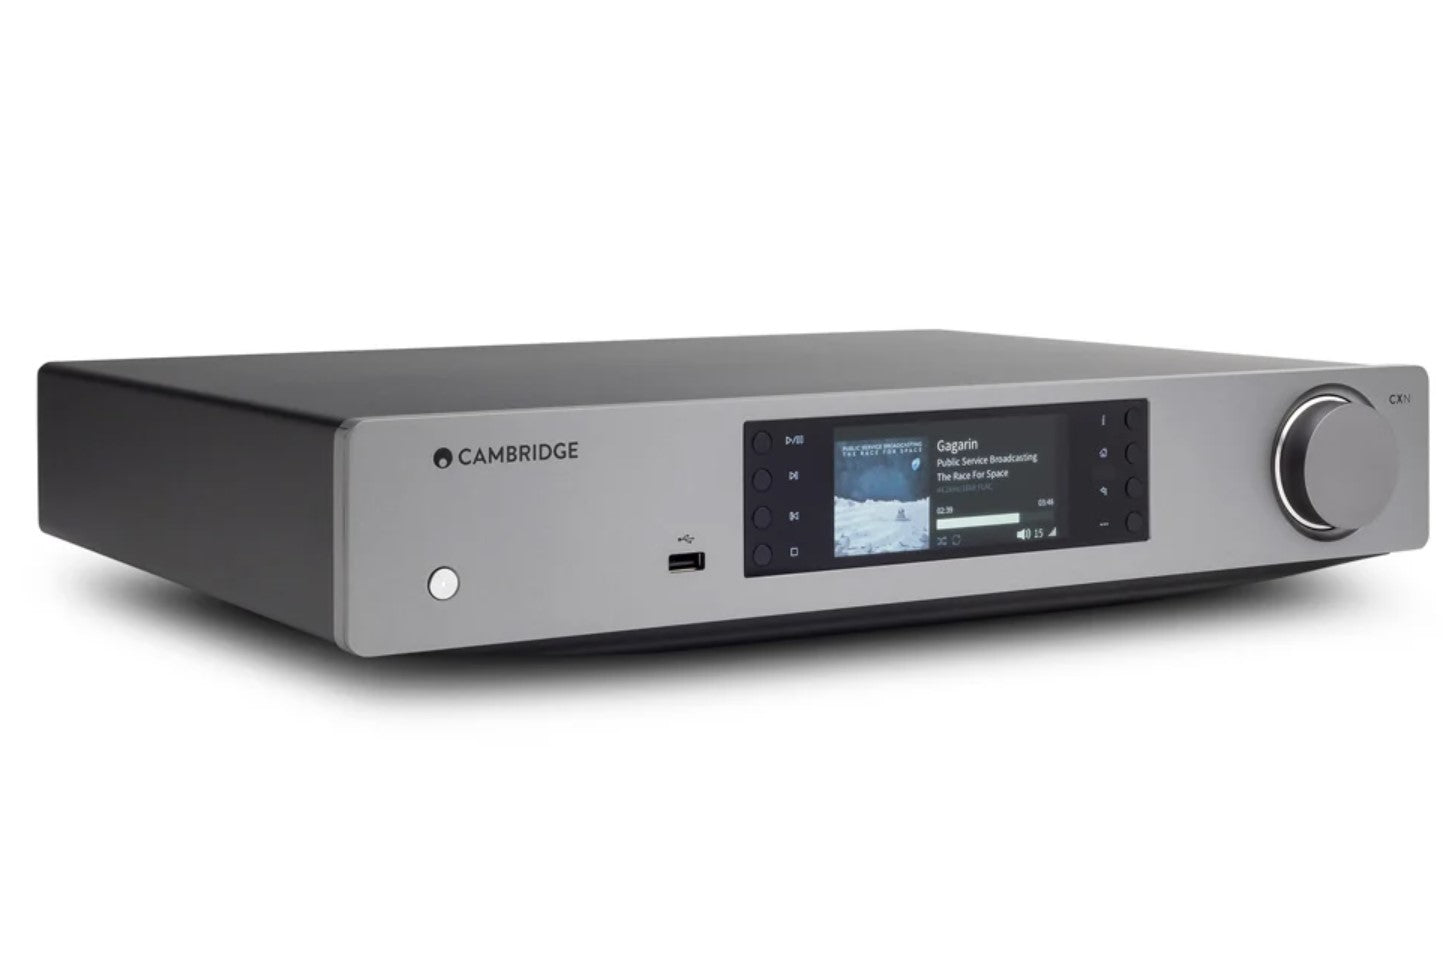 Cambridge Audio CXNV2-RB Stereo Network Streamer All-in-One Wireless Media Streaming with WiFi Lunar Grey - Certified Refurbished